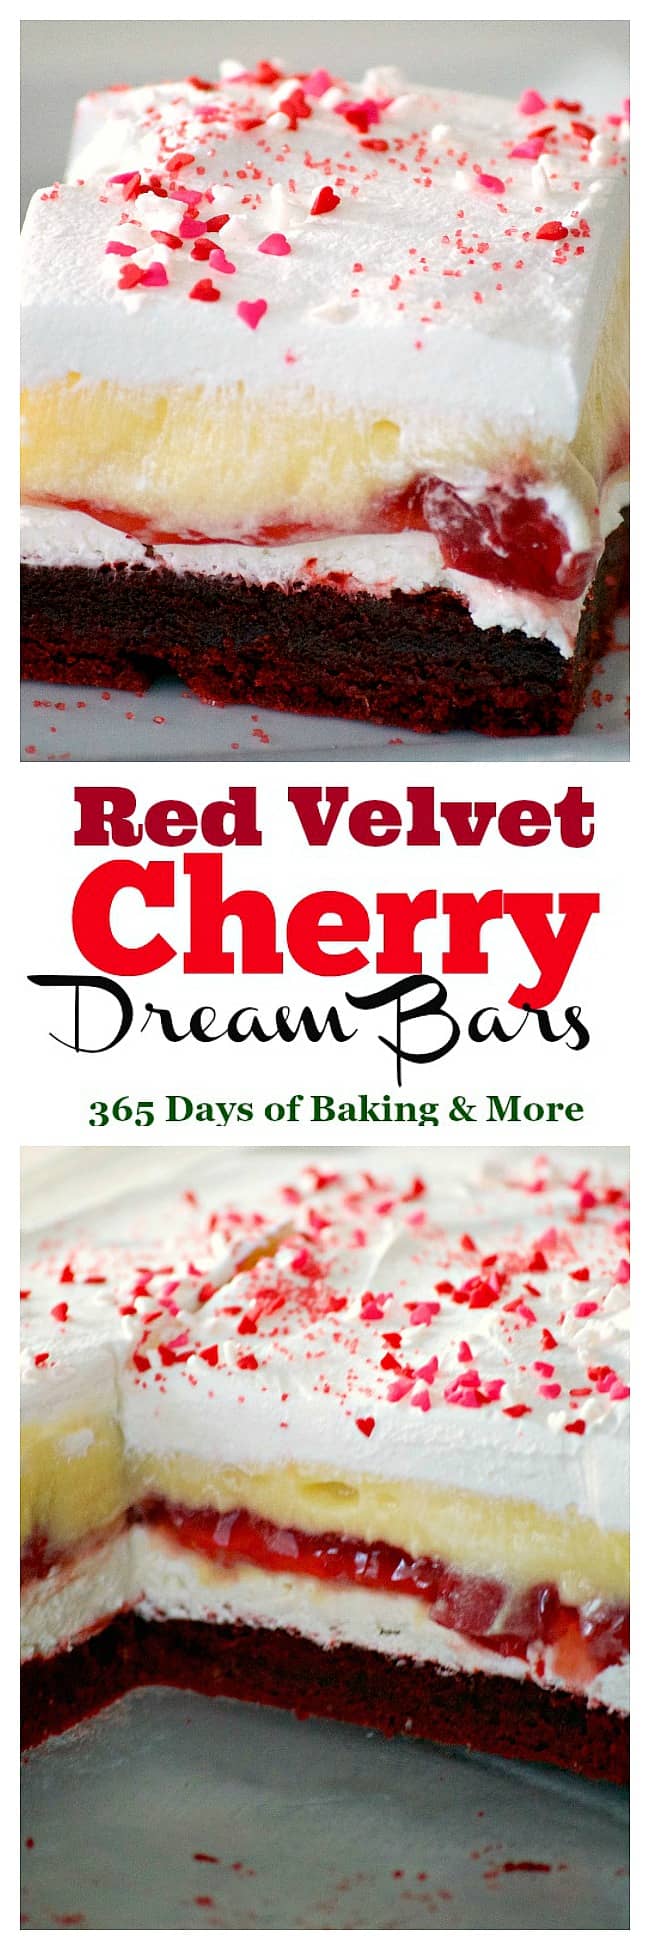 These Red Velvet Cherry Dream Bars with their red velvet cookie crust, sweet cheese layer, cherry pie filling, vanilla pudding and whipped topping make these bars the perfect holiday treat. Or better yet, enjoy them all year 'round.